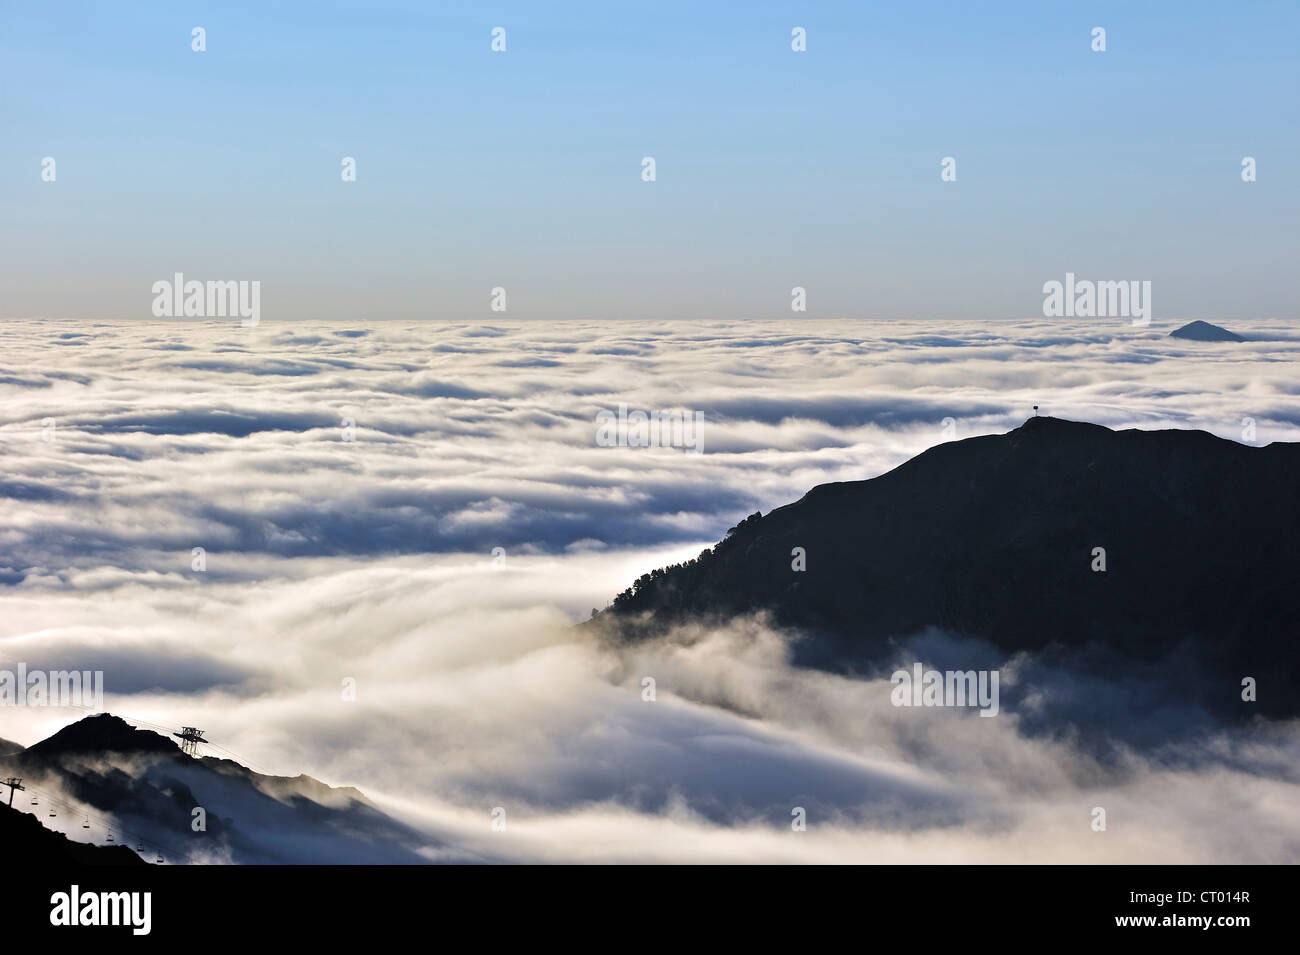 View over silhouetted chairlifts and mountains covered in mist at sunrise, Col du Tourmalet, Hautes-Pyrénées, Pyrenees, France Stock Photo